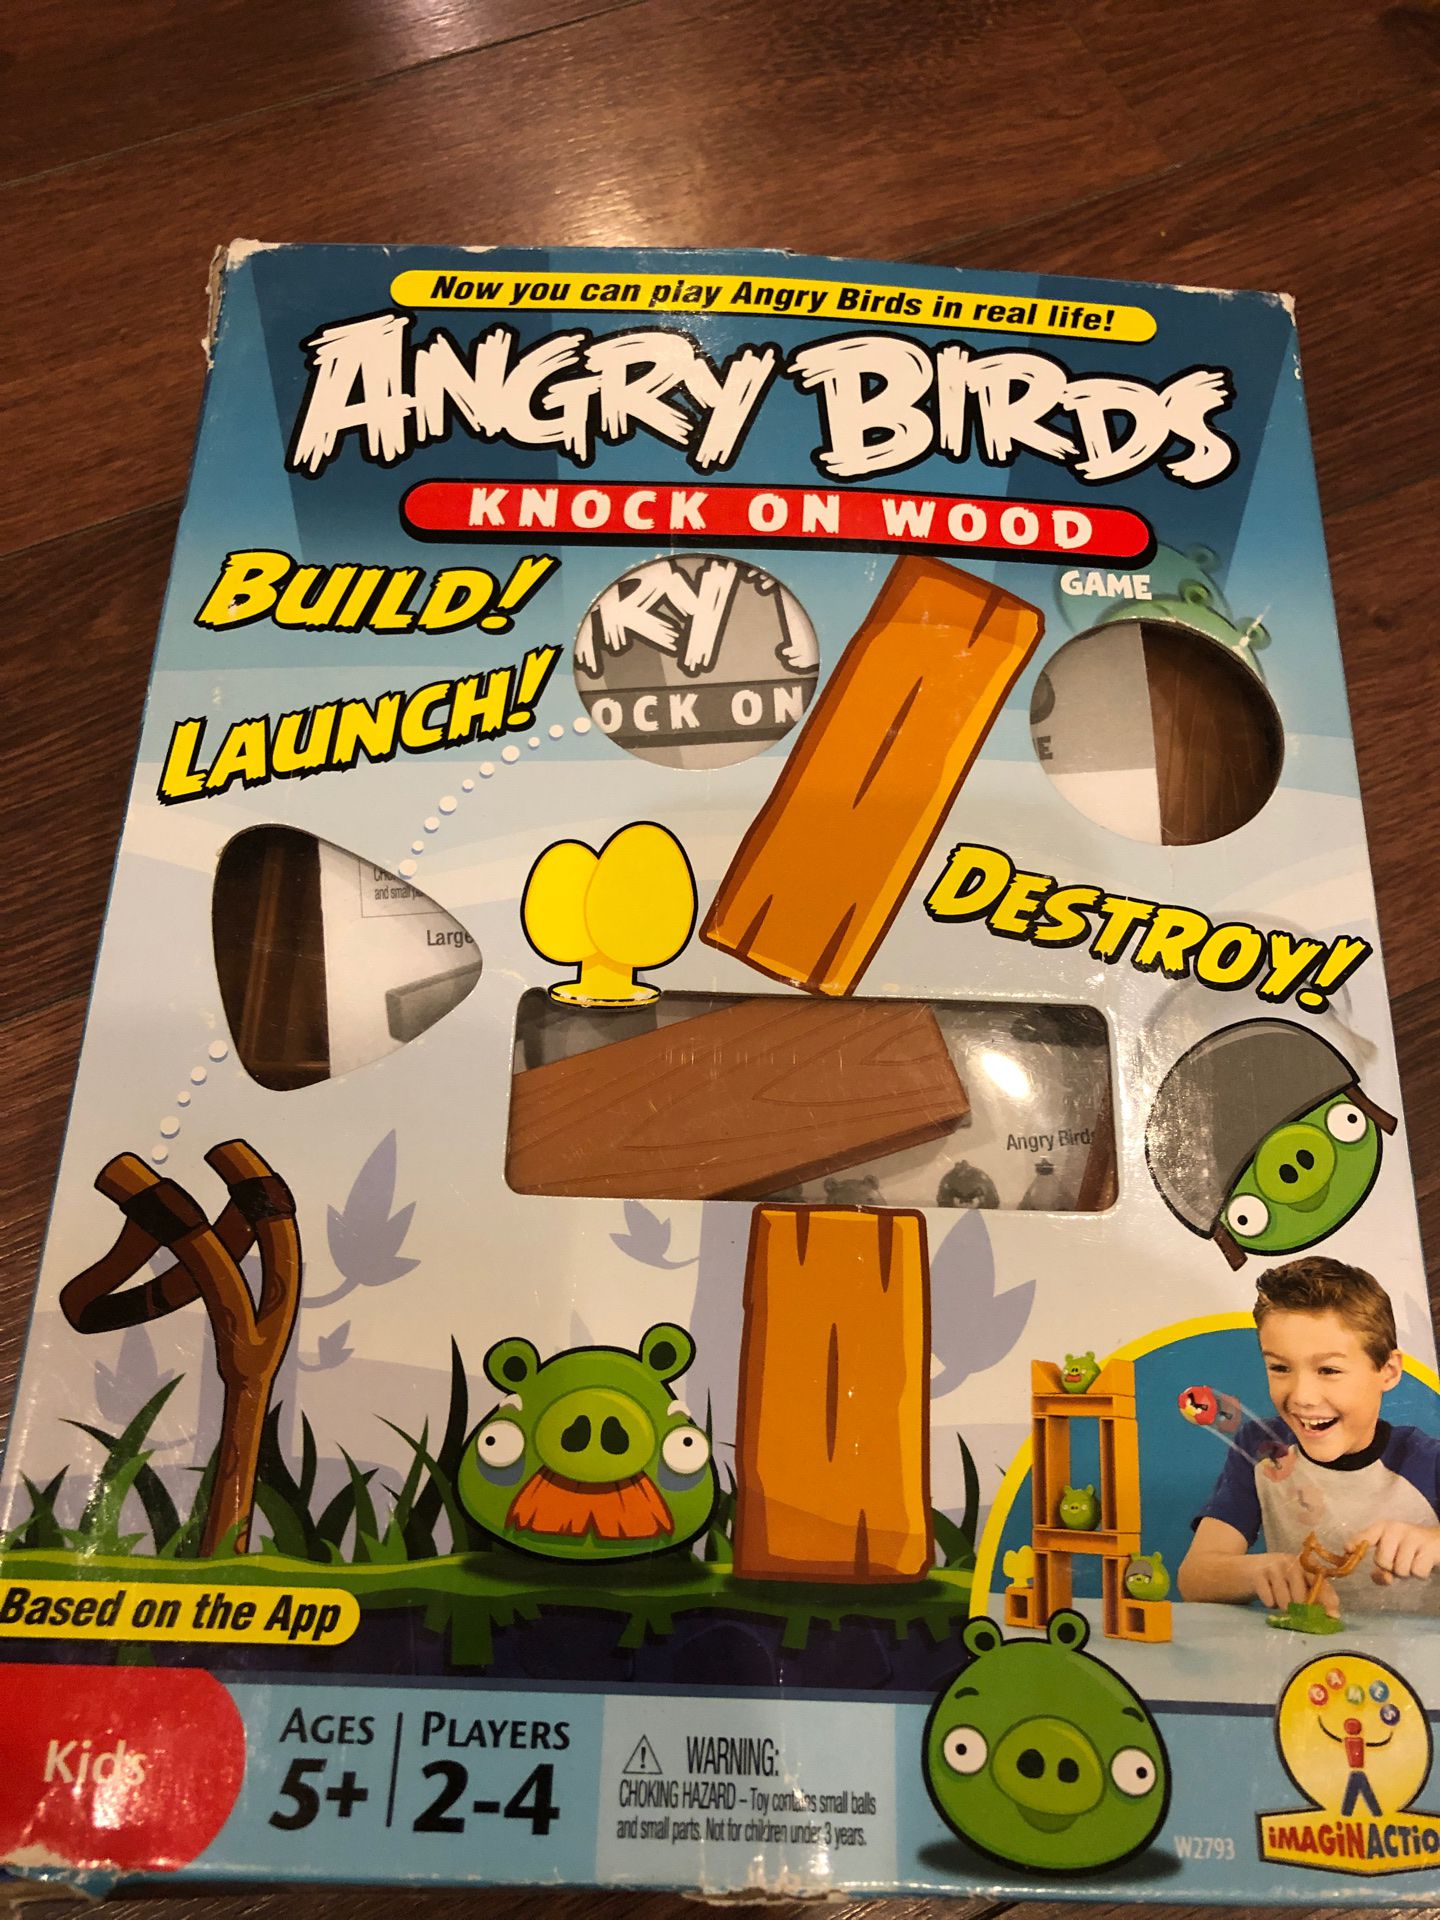 Angry birds knock on wood game - 2 to 4 players. Ages five and up